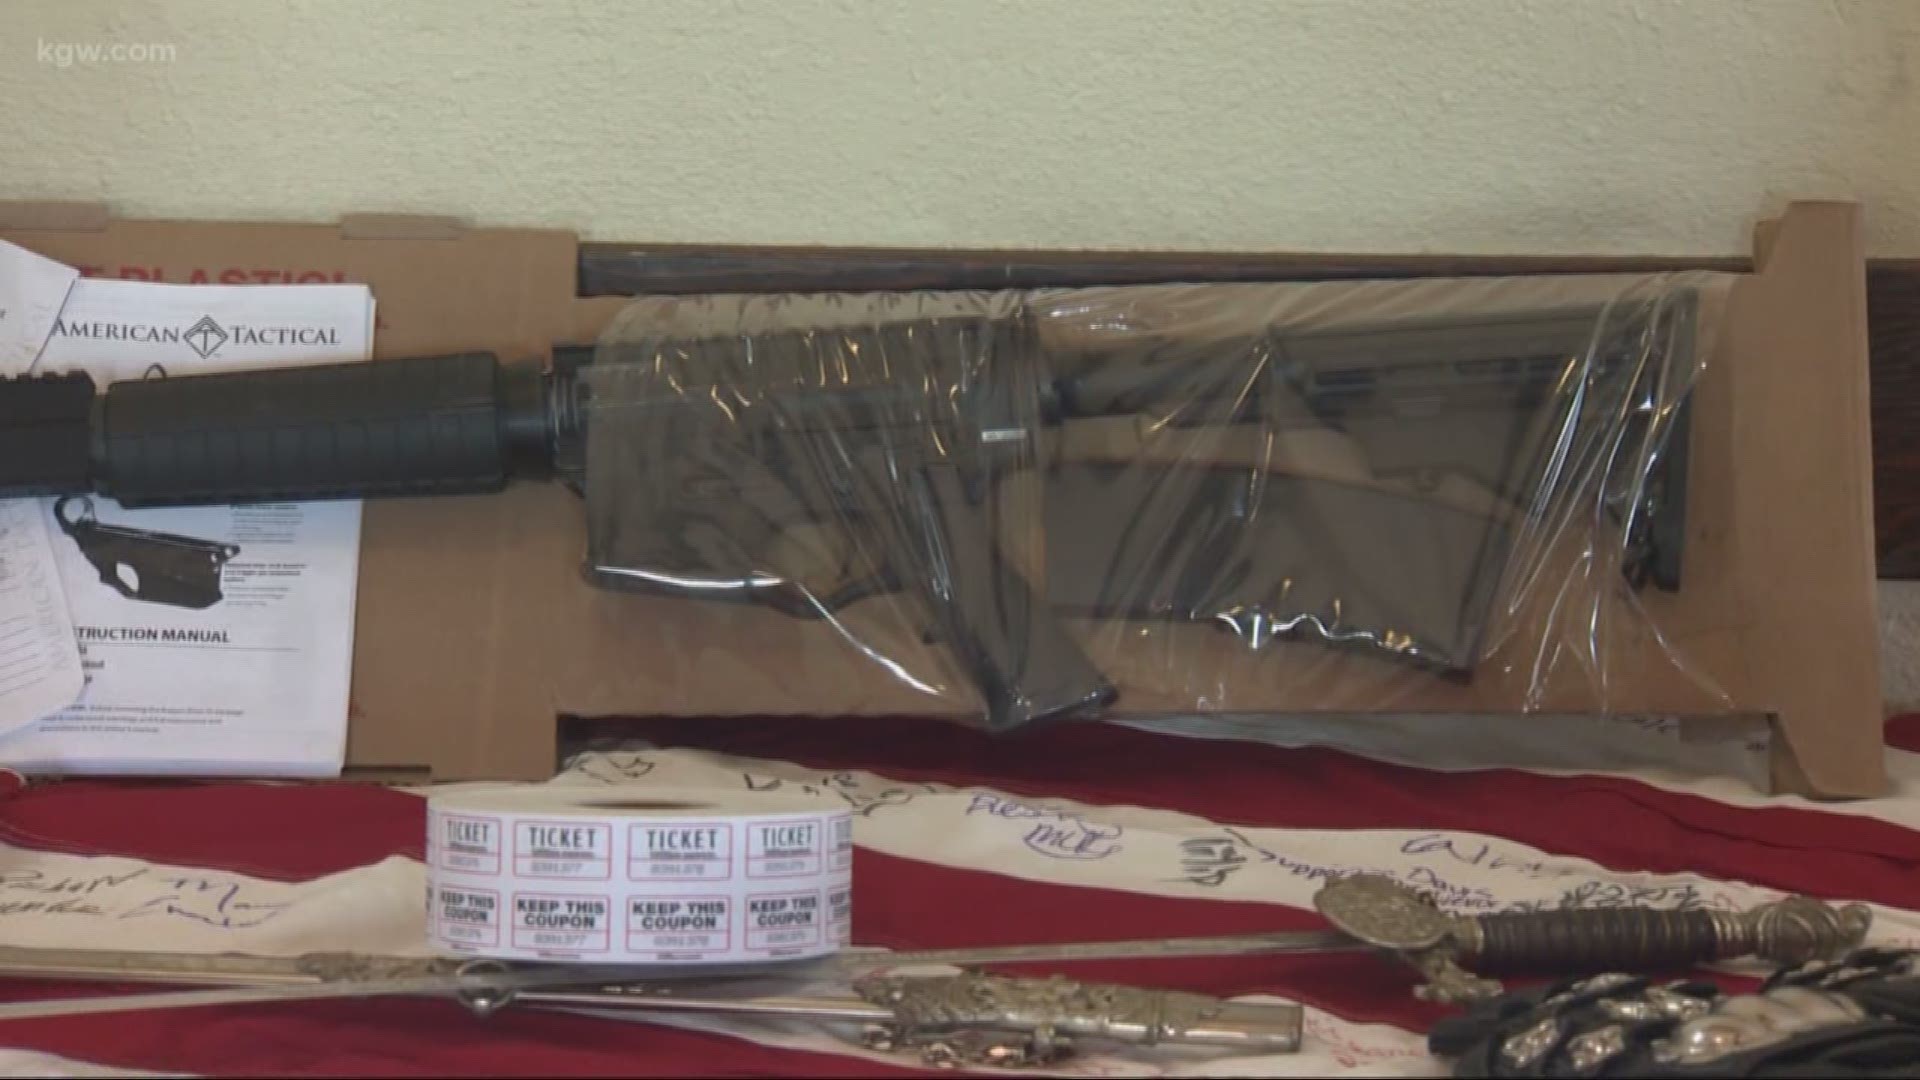 AR-15 raffled off to raise funds for veterans